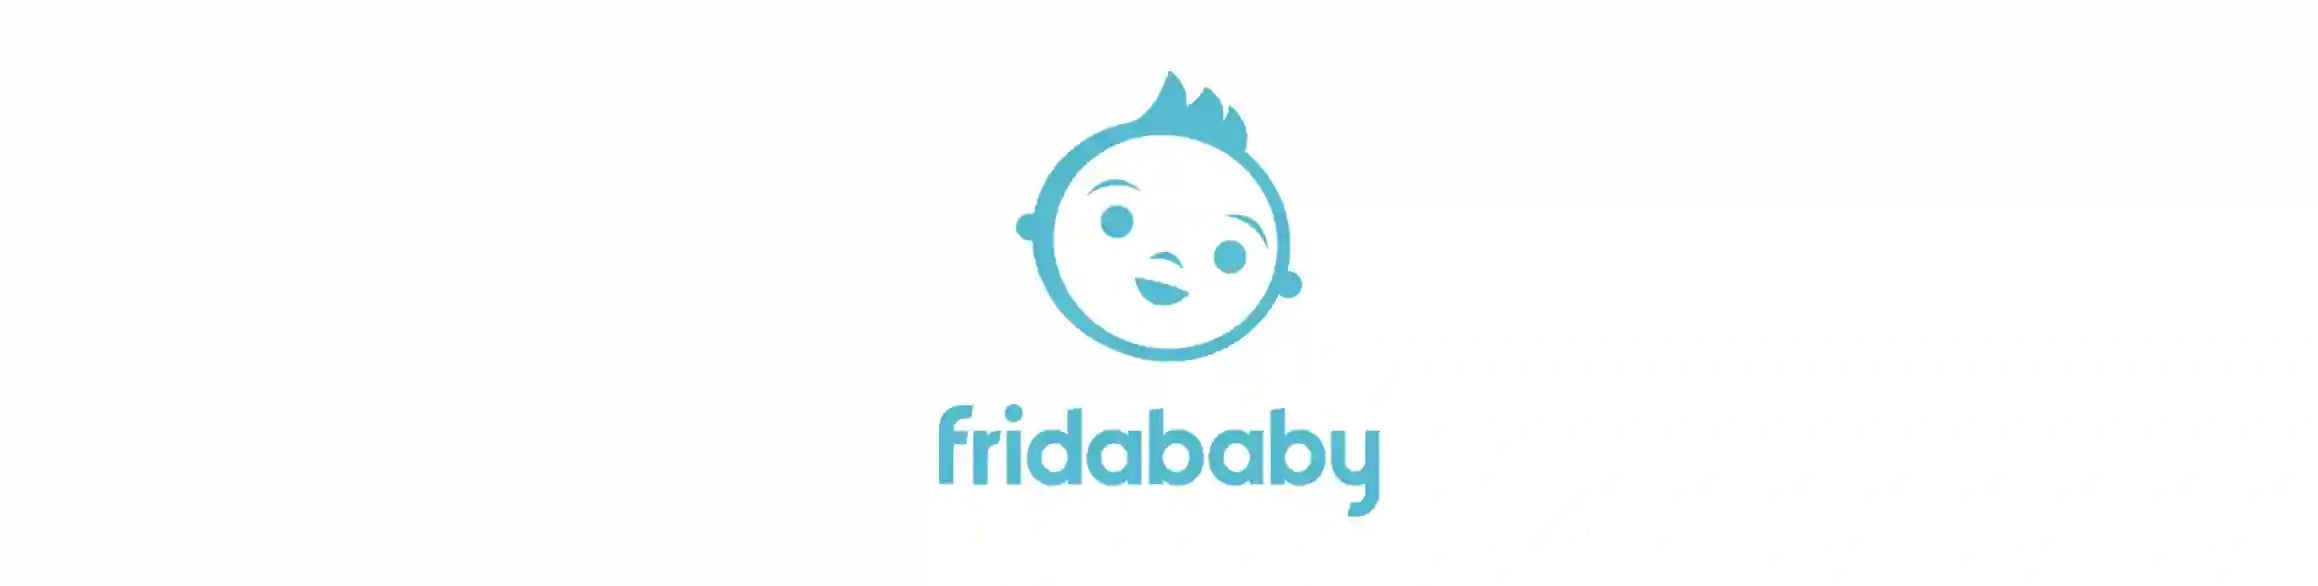 fridababy products